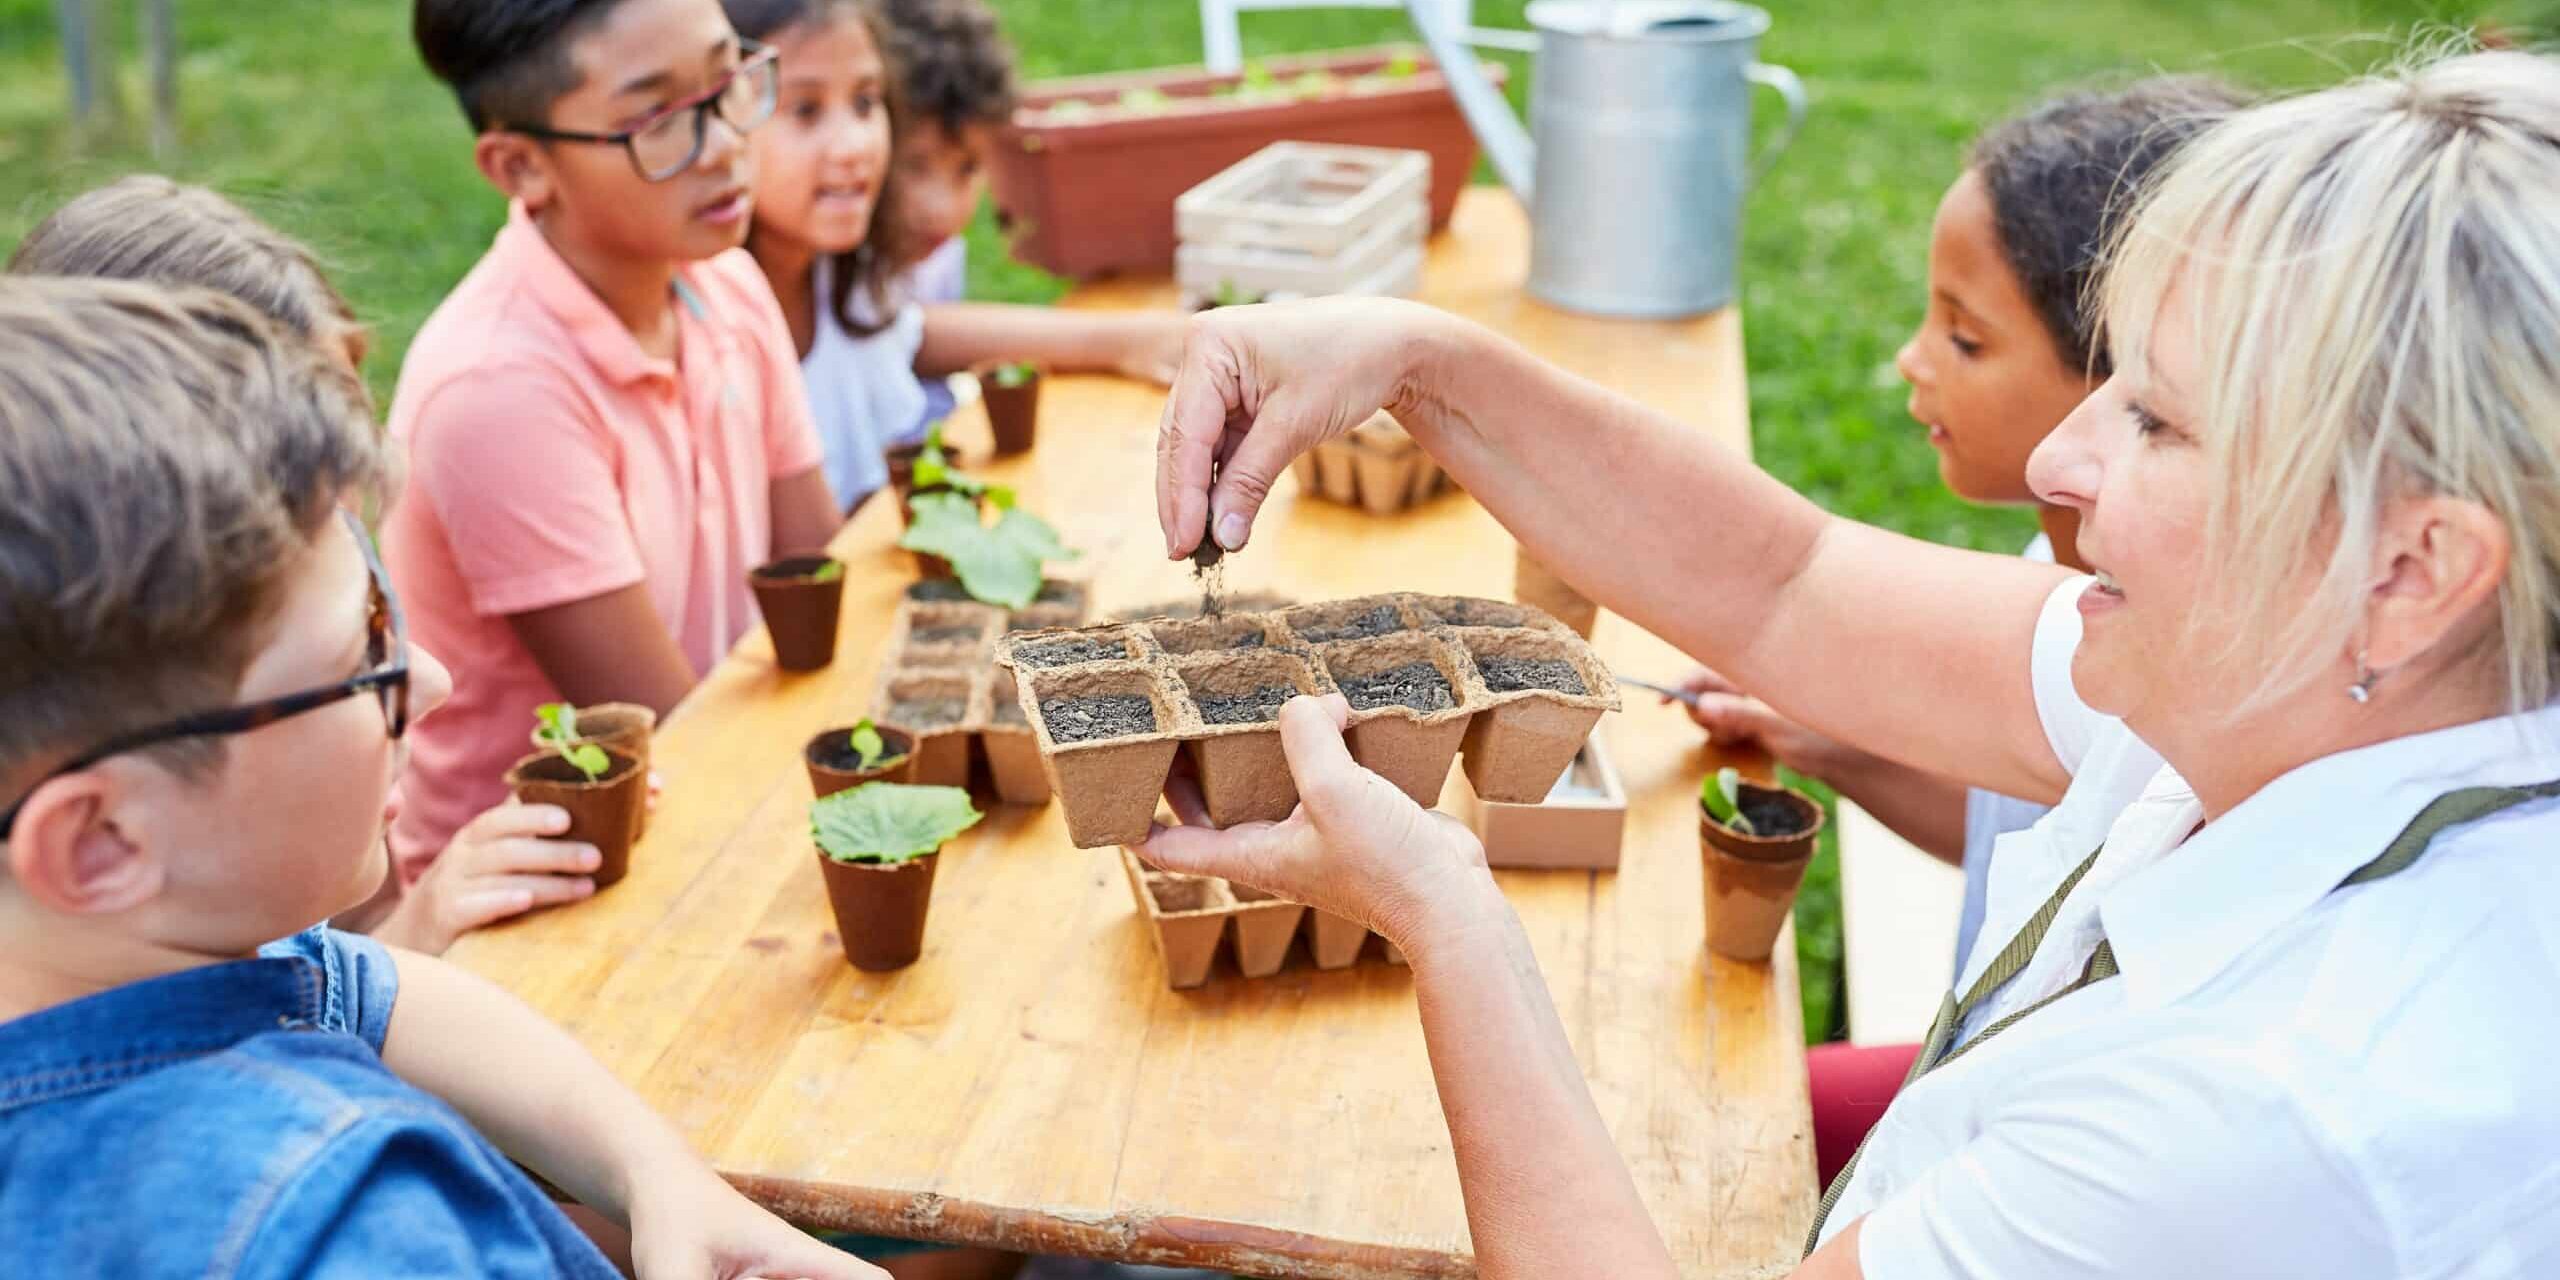 A woman sitting with five children at a table doing gardening activities